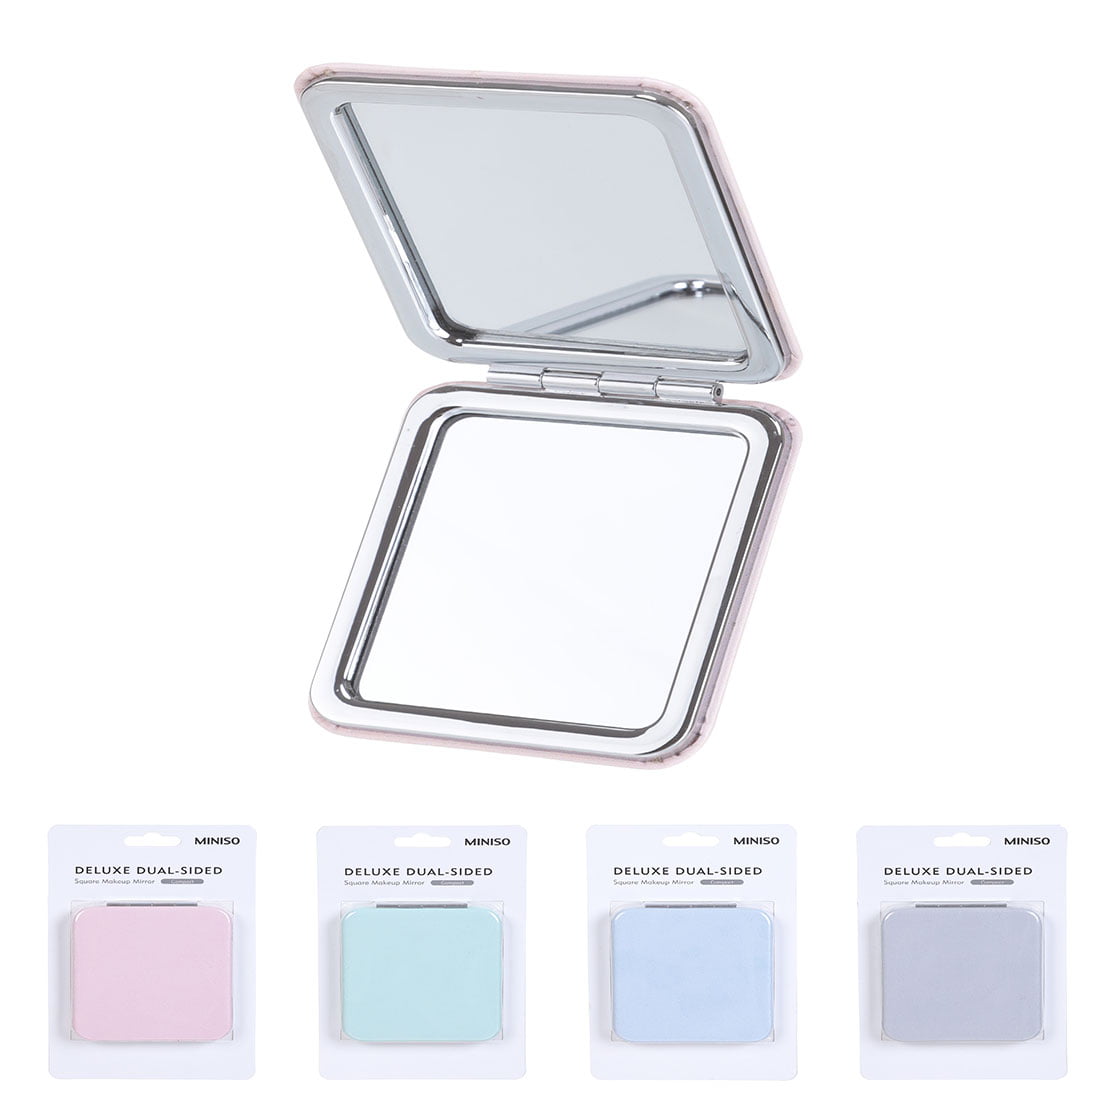 Miniso Deluxe Dual Sided Square Makeup Mirror Portable Travel Light 